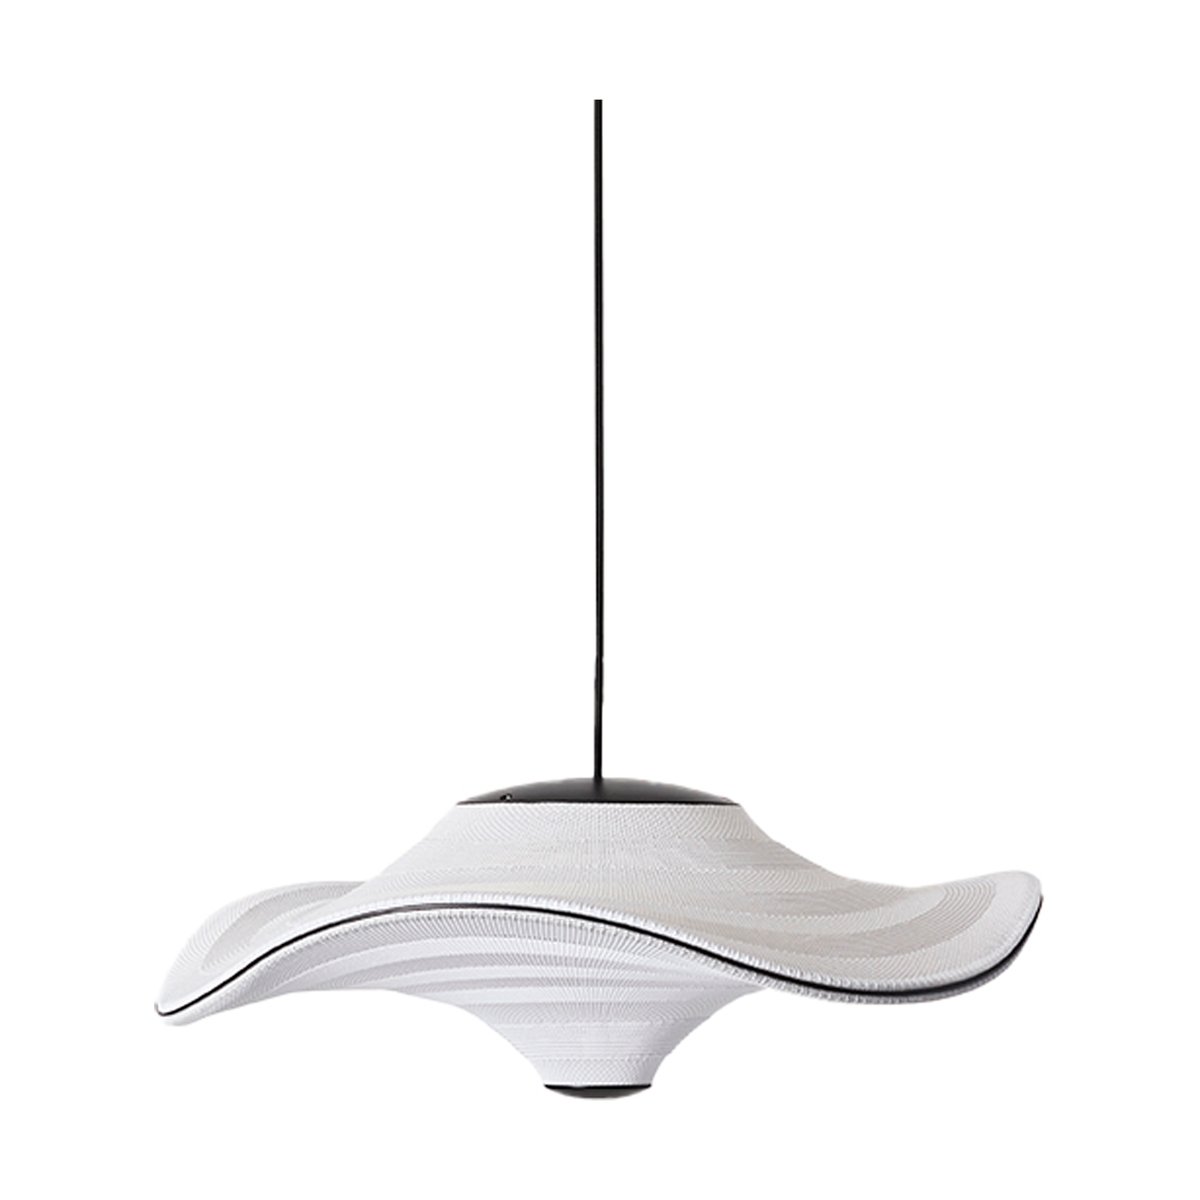 Made By Hand Flying hanglamp Ø58 cm Ivory white